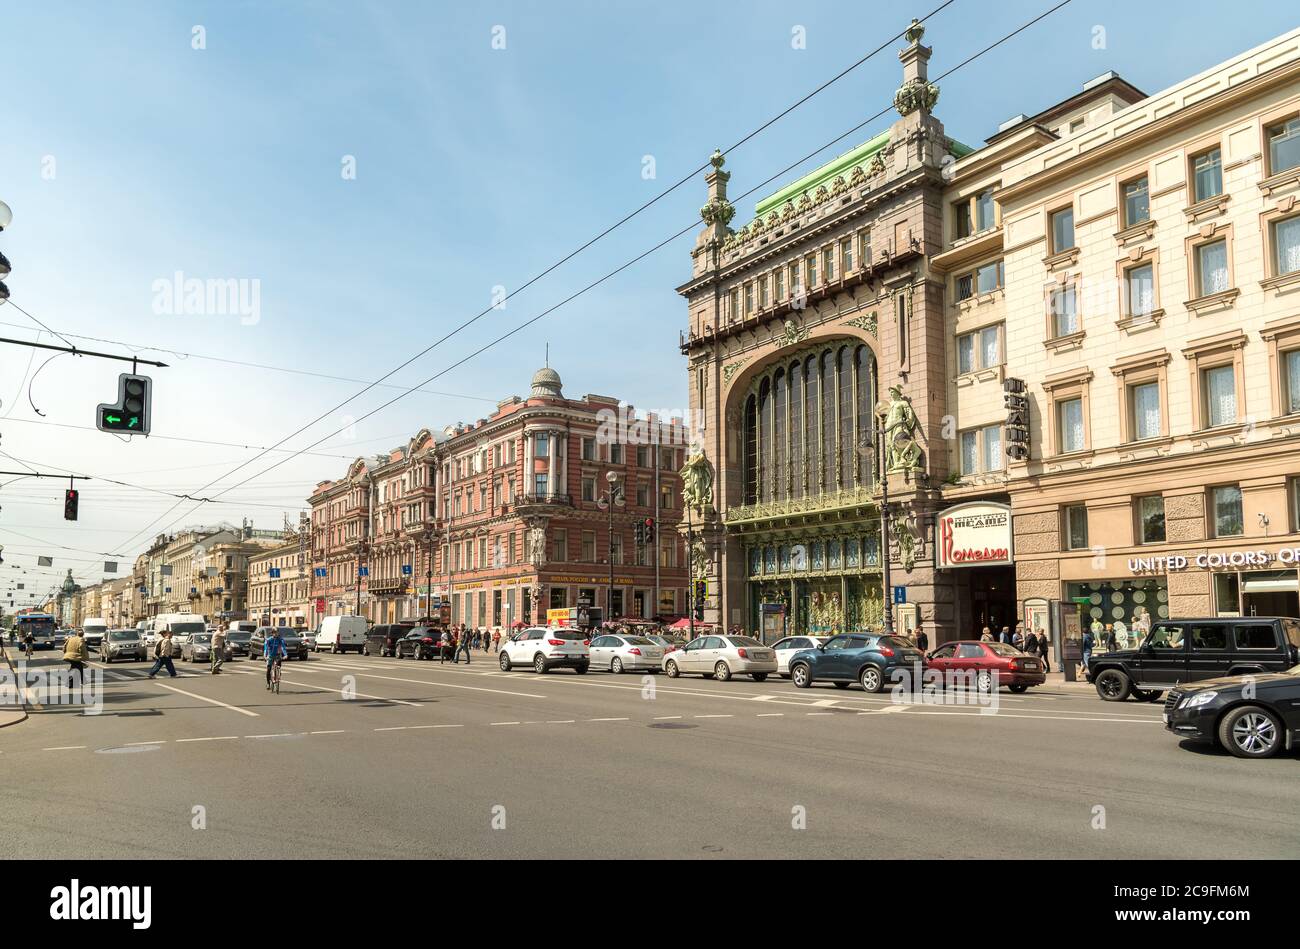 Saint Petersburg, Russia - June 11, 2015: View to Nevsky Prospekt with Eliseevsky Shop and Comedy theater in the center of Saint Petersburg. Urban sce Stock Photo